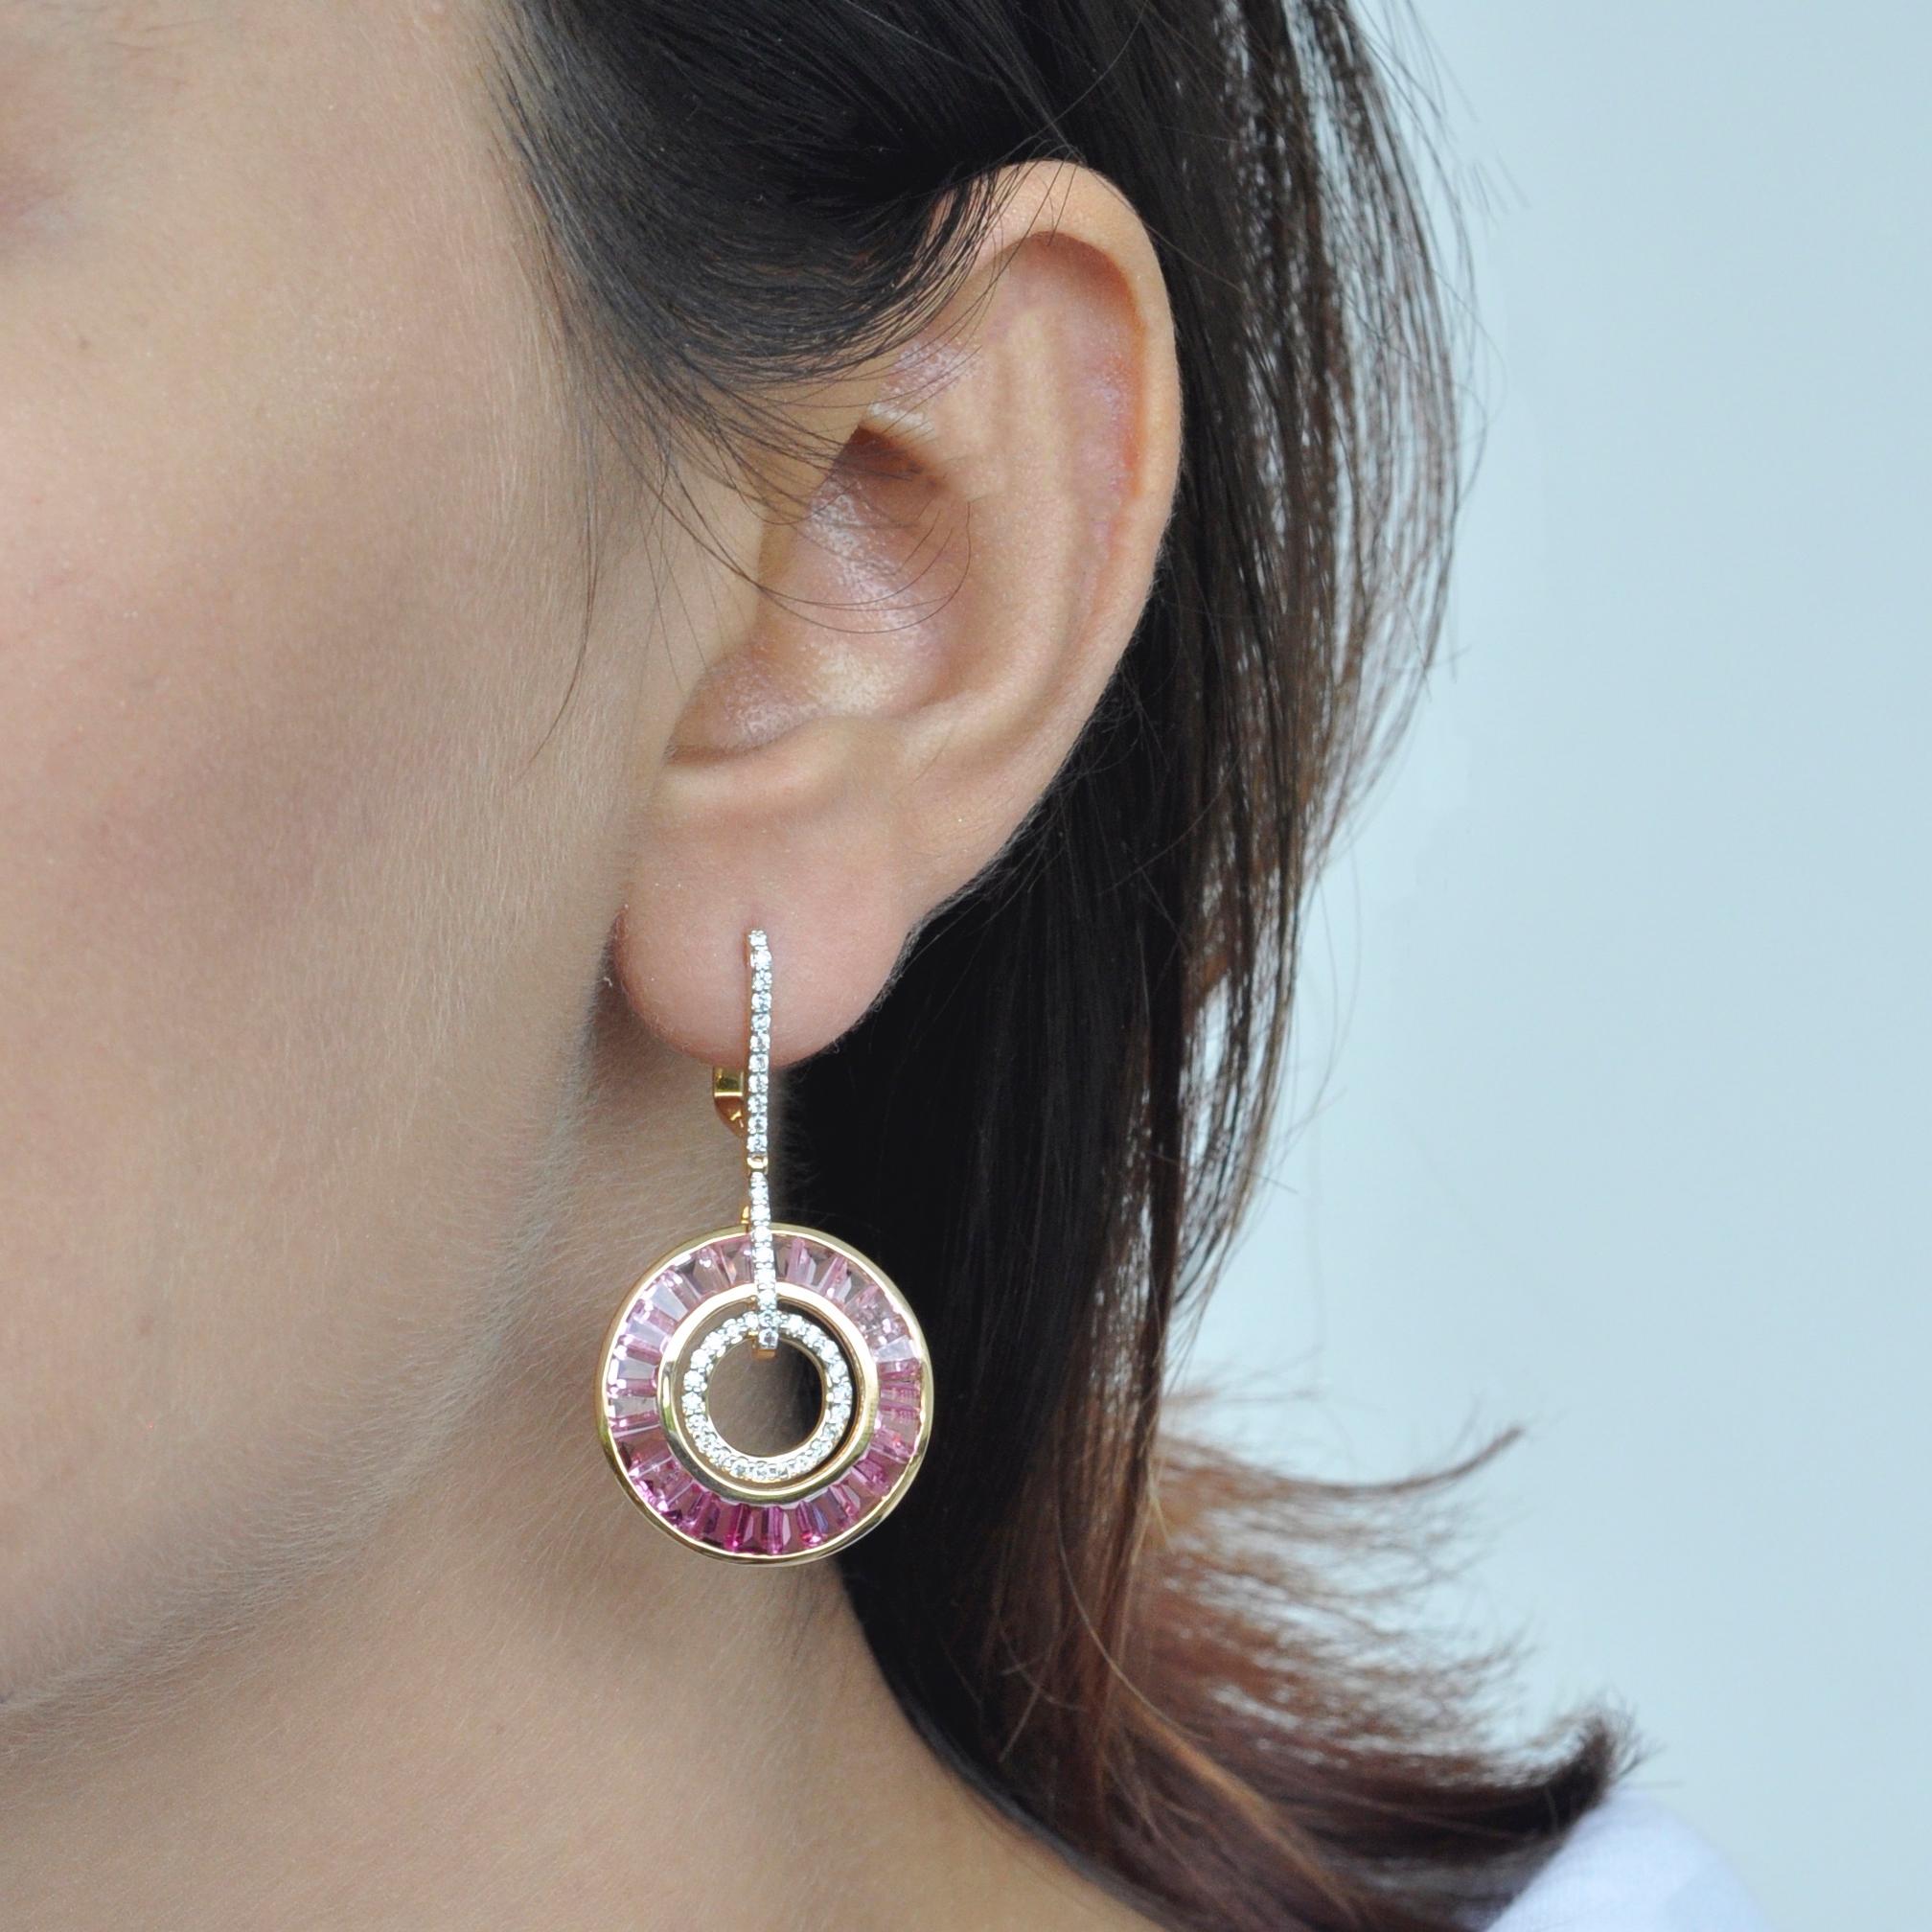 Art deco style, color and culture all come together to inspire this delicate 18 karat gold pink tourmaline baguette diamond dangle art deco pair of circle earrings, where dégradé (gradient) hues of pink tourmaline exudes feminism while dictating the